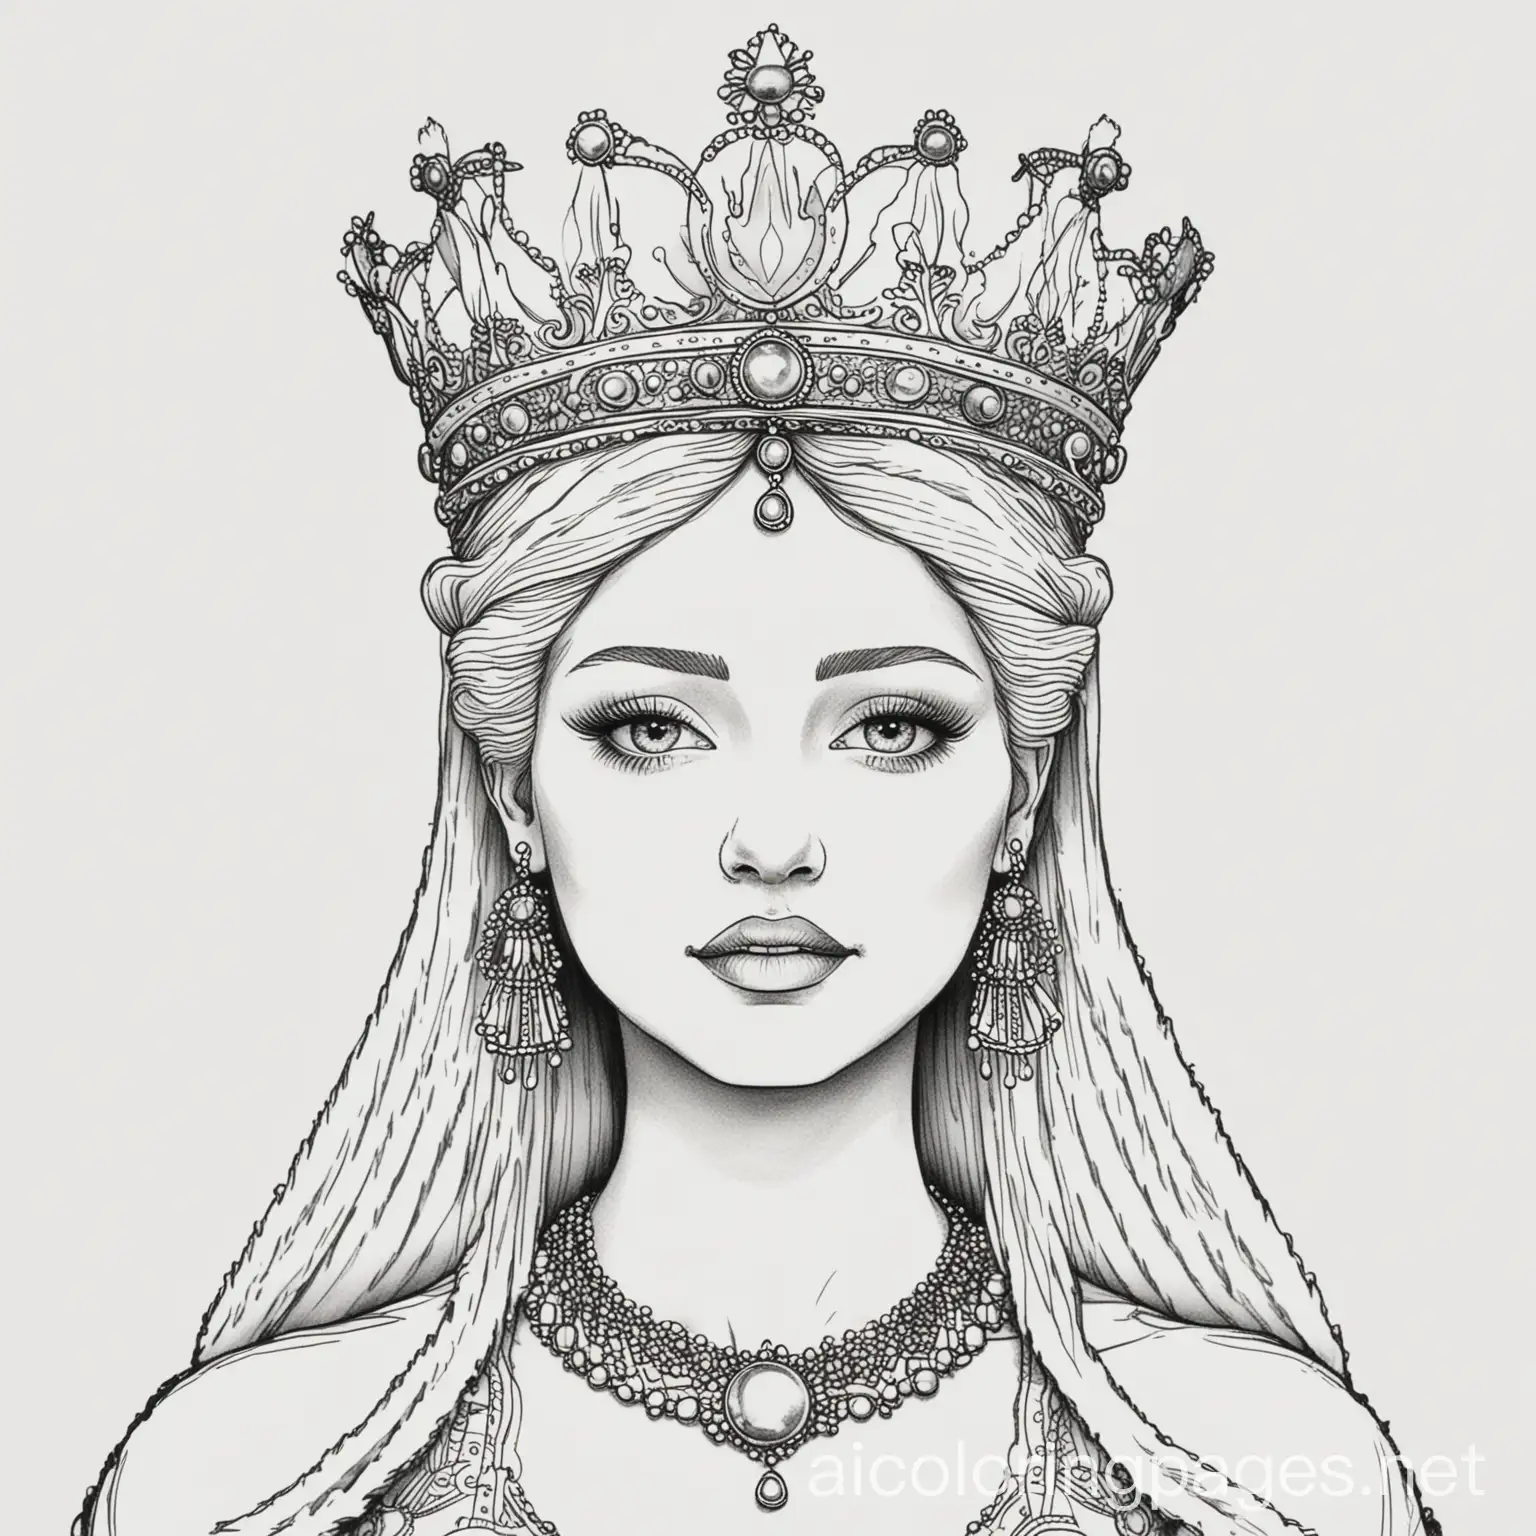 queen, Coloring Page, black and white, line art, white background, Simplicity, Ample White Space. The background of the coloring page is plain white to make it easy for young children to color within the lines. The outlines of all the subjects are easy to distinguish, making it simple for kids to color without too much difficulty